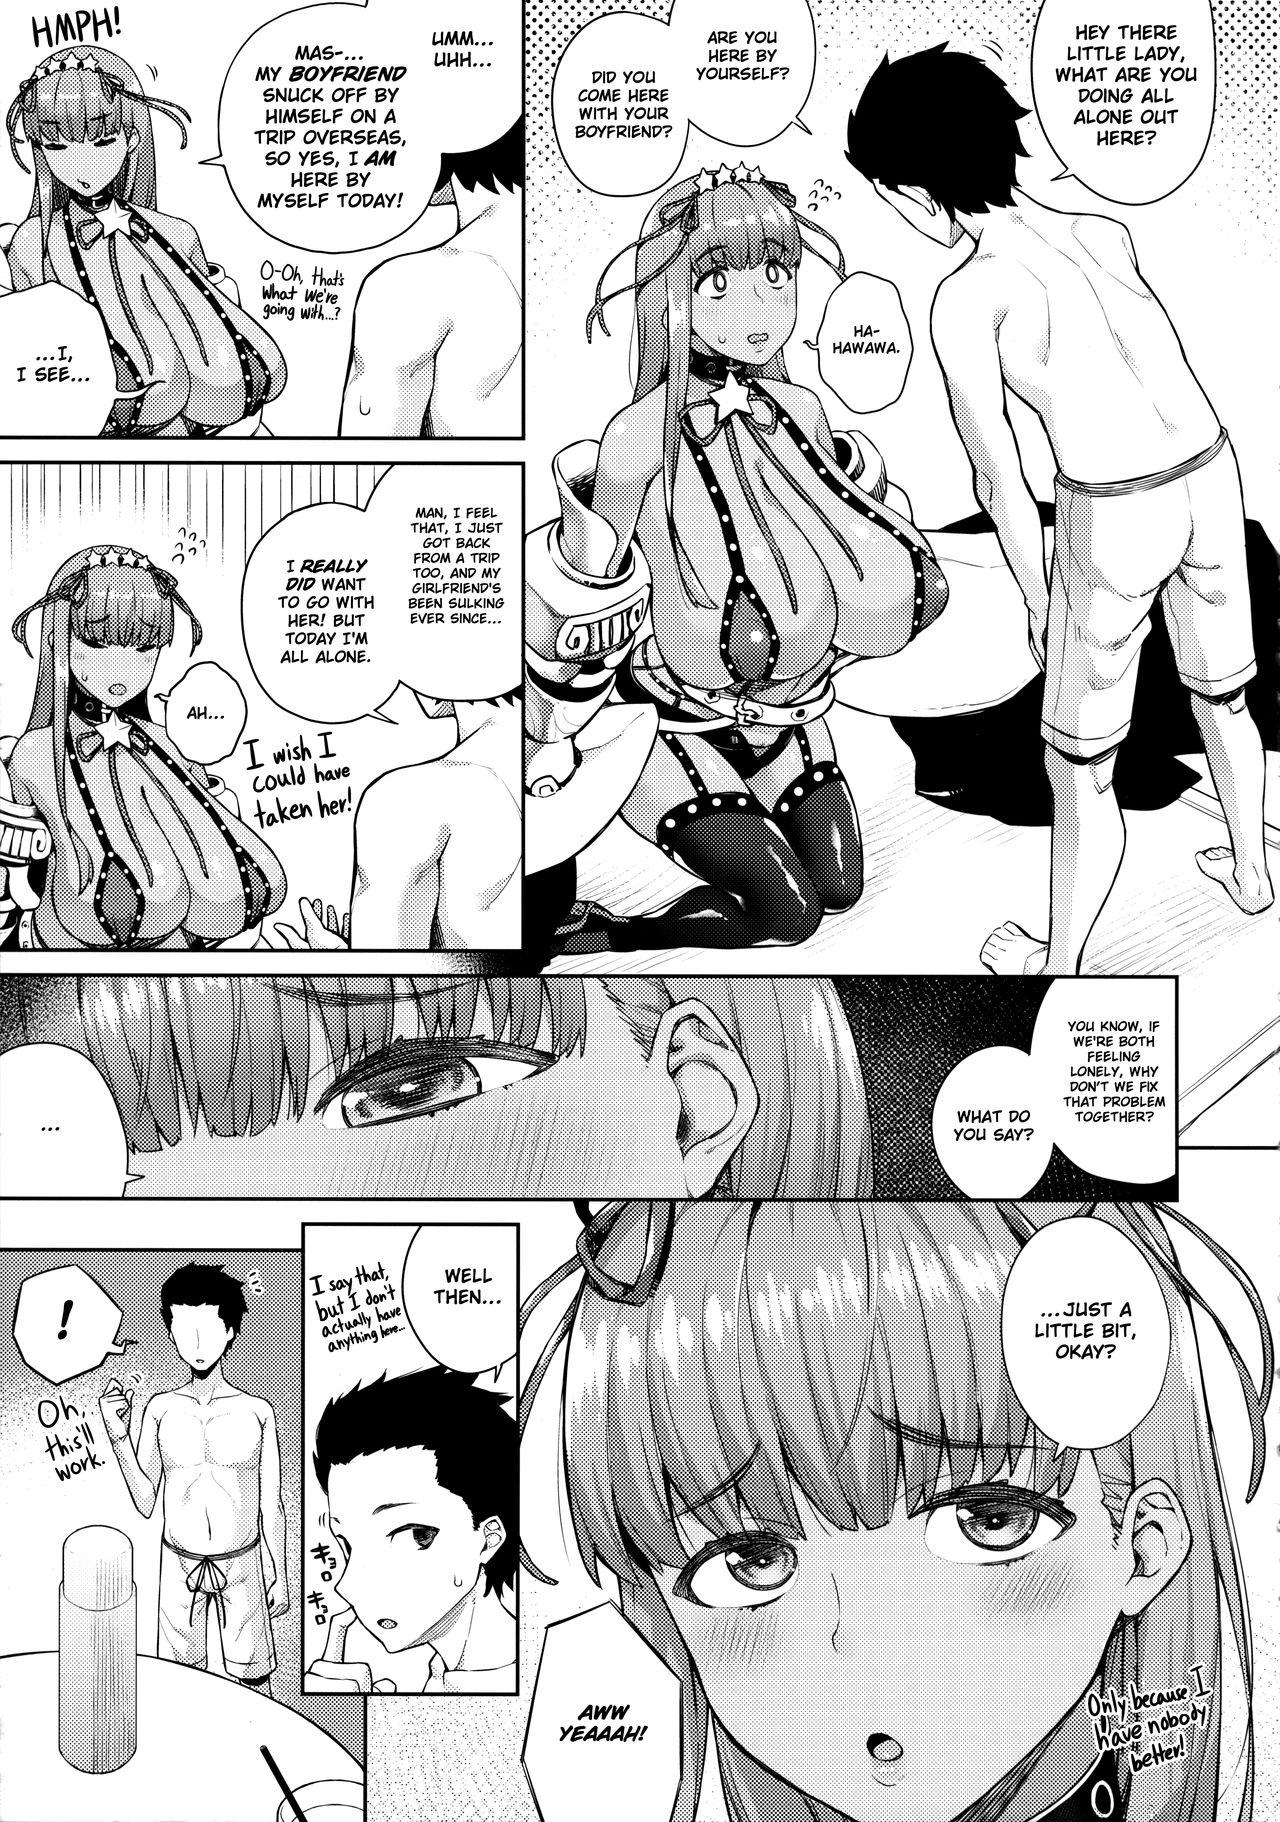 New Kyokou no Umibe nite | at the fictional seaside - Fate grand order Stepdad - Page 5